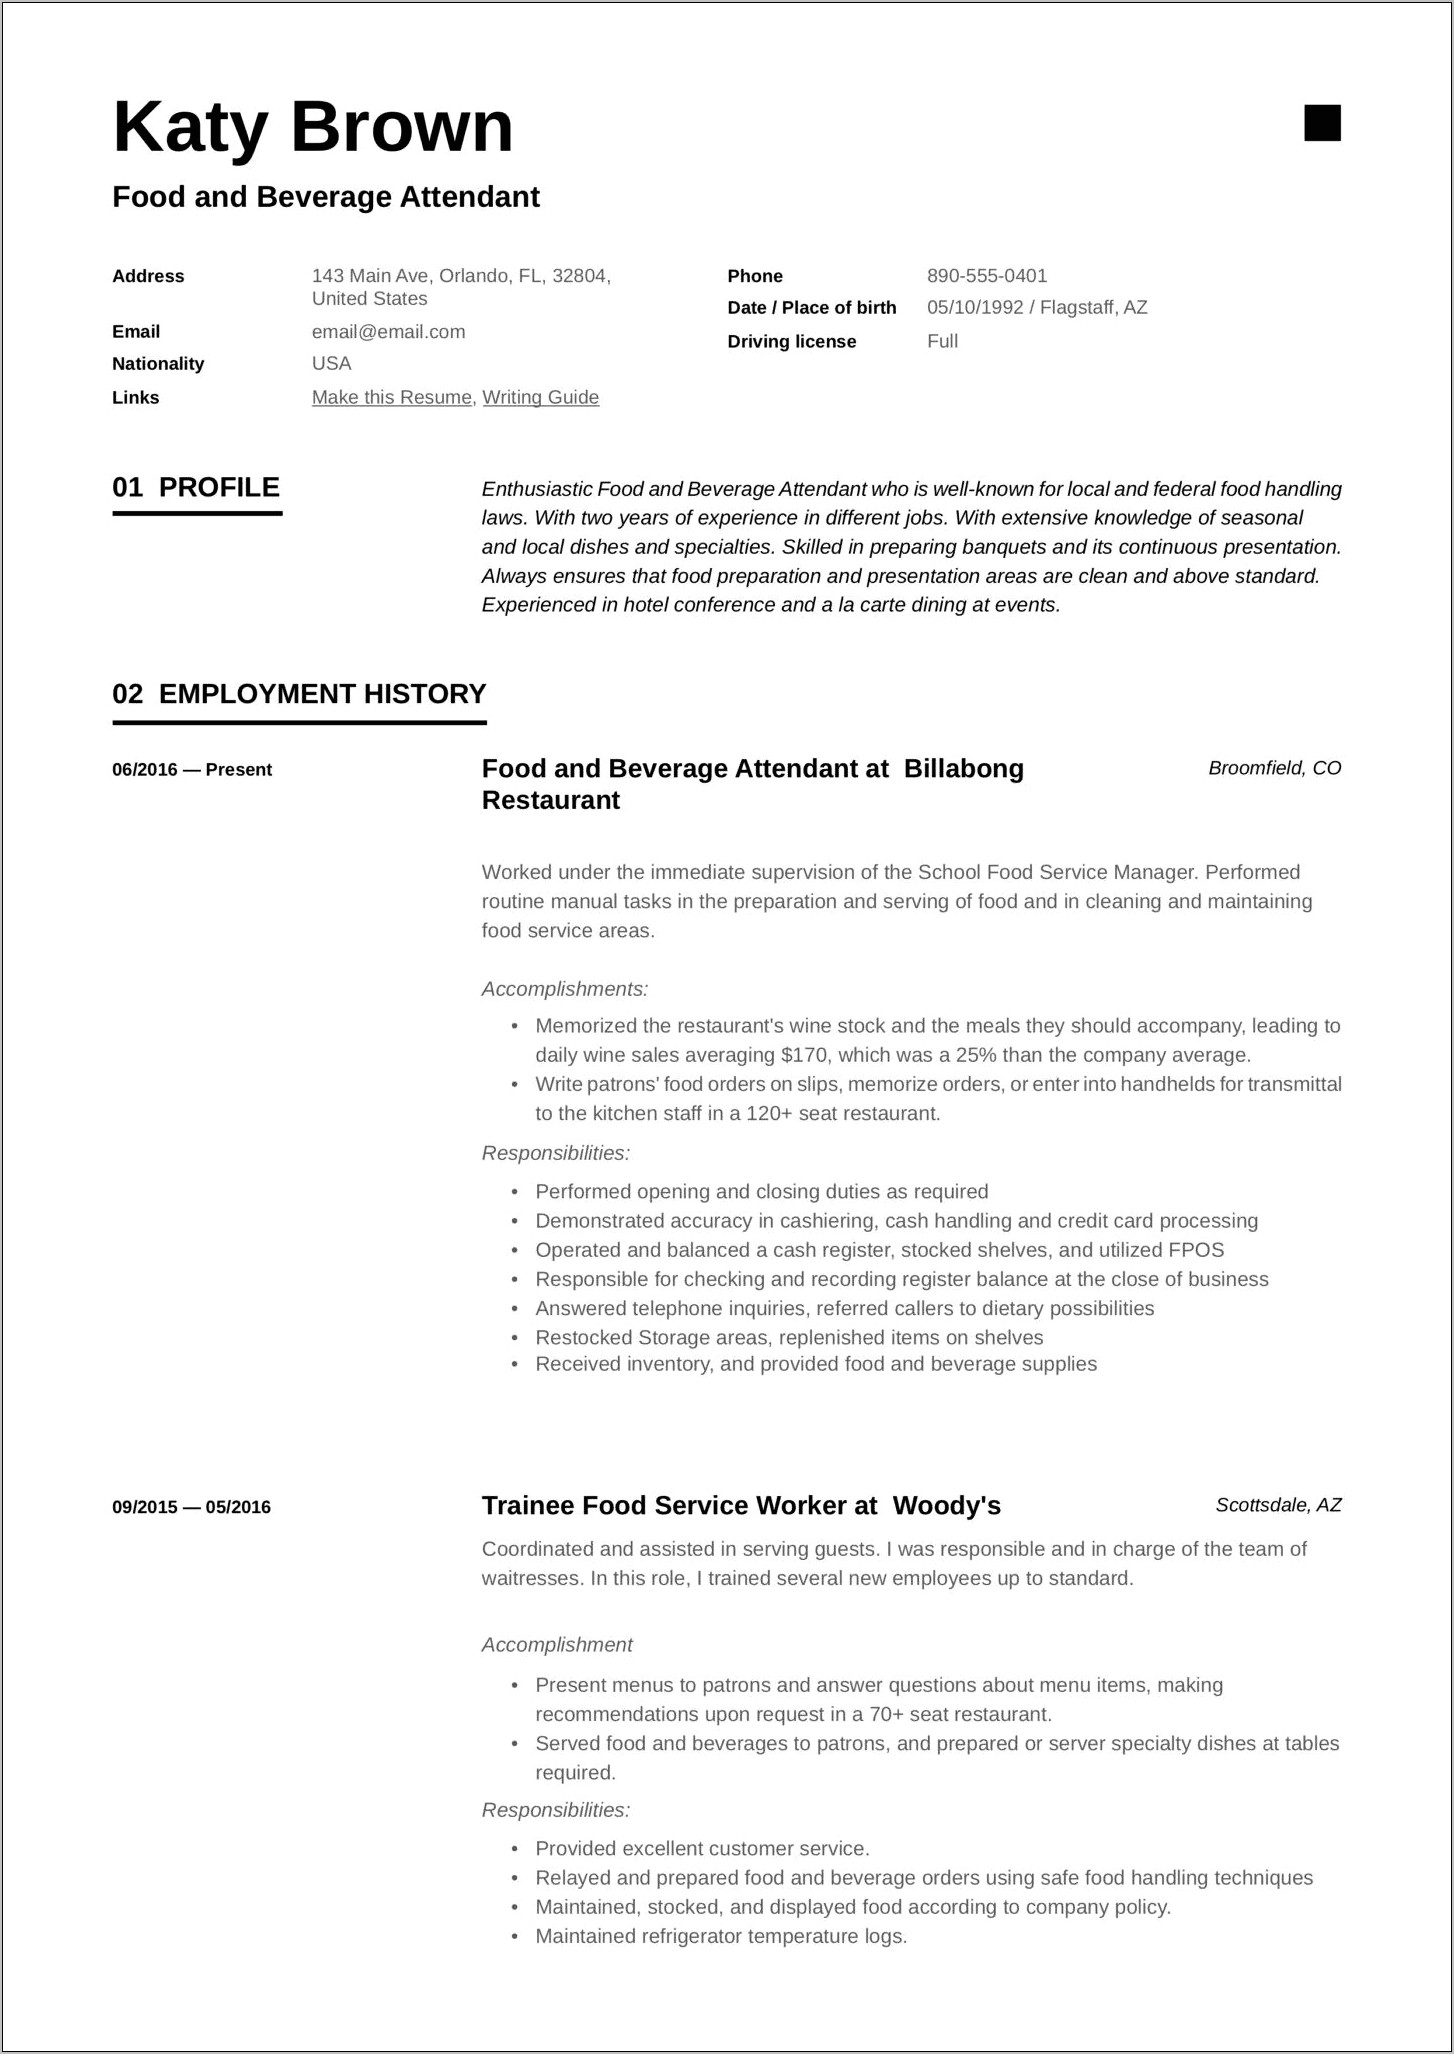 Resume Objectives Sample For Service Crew